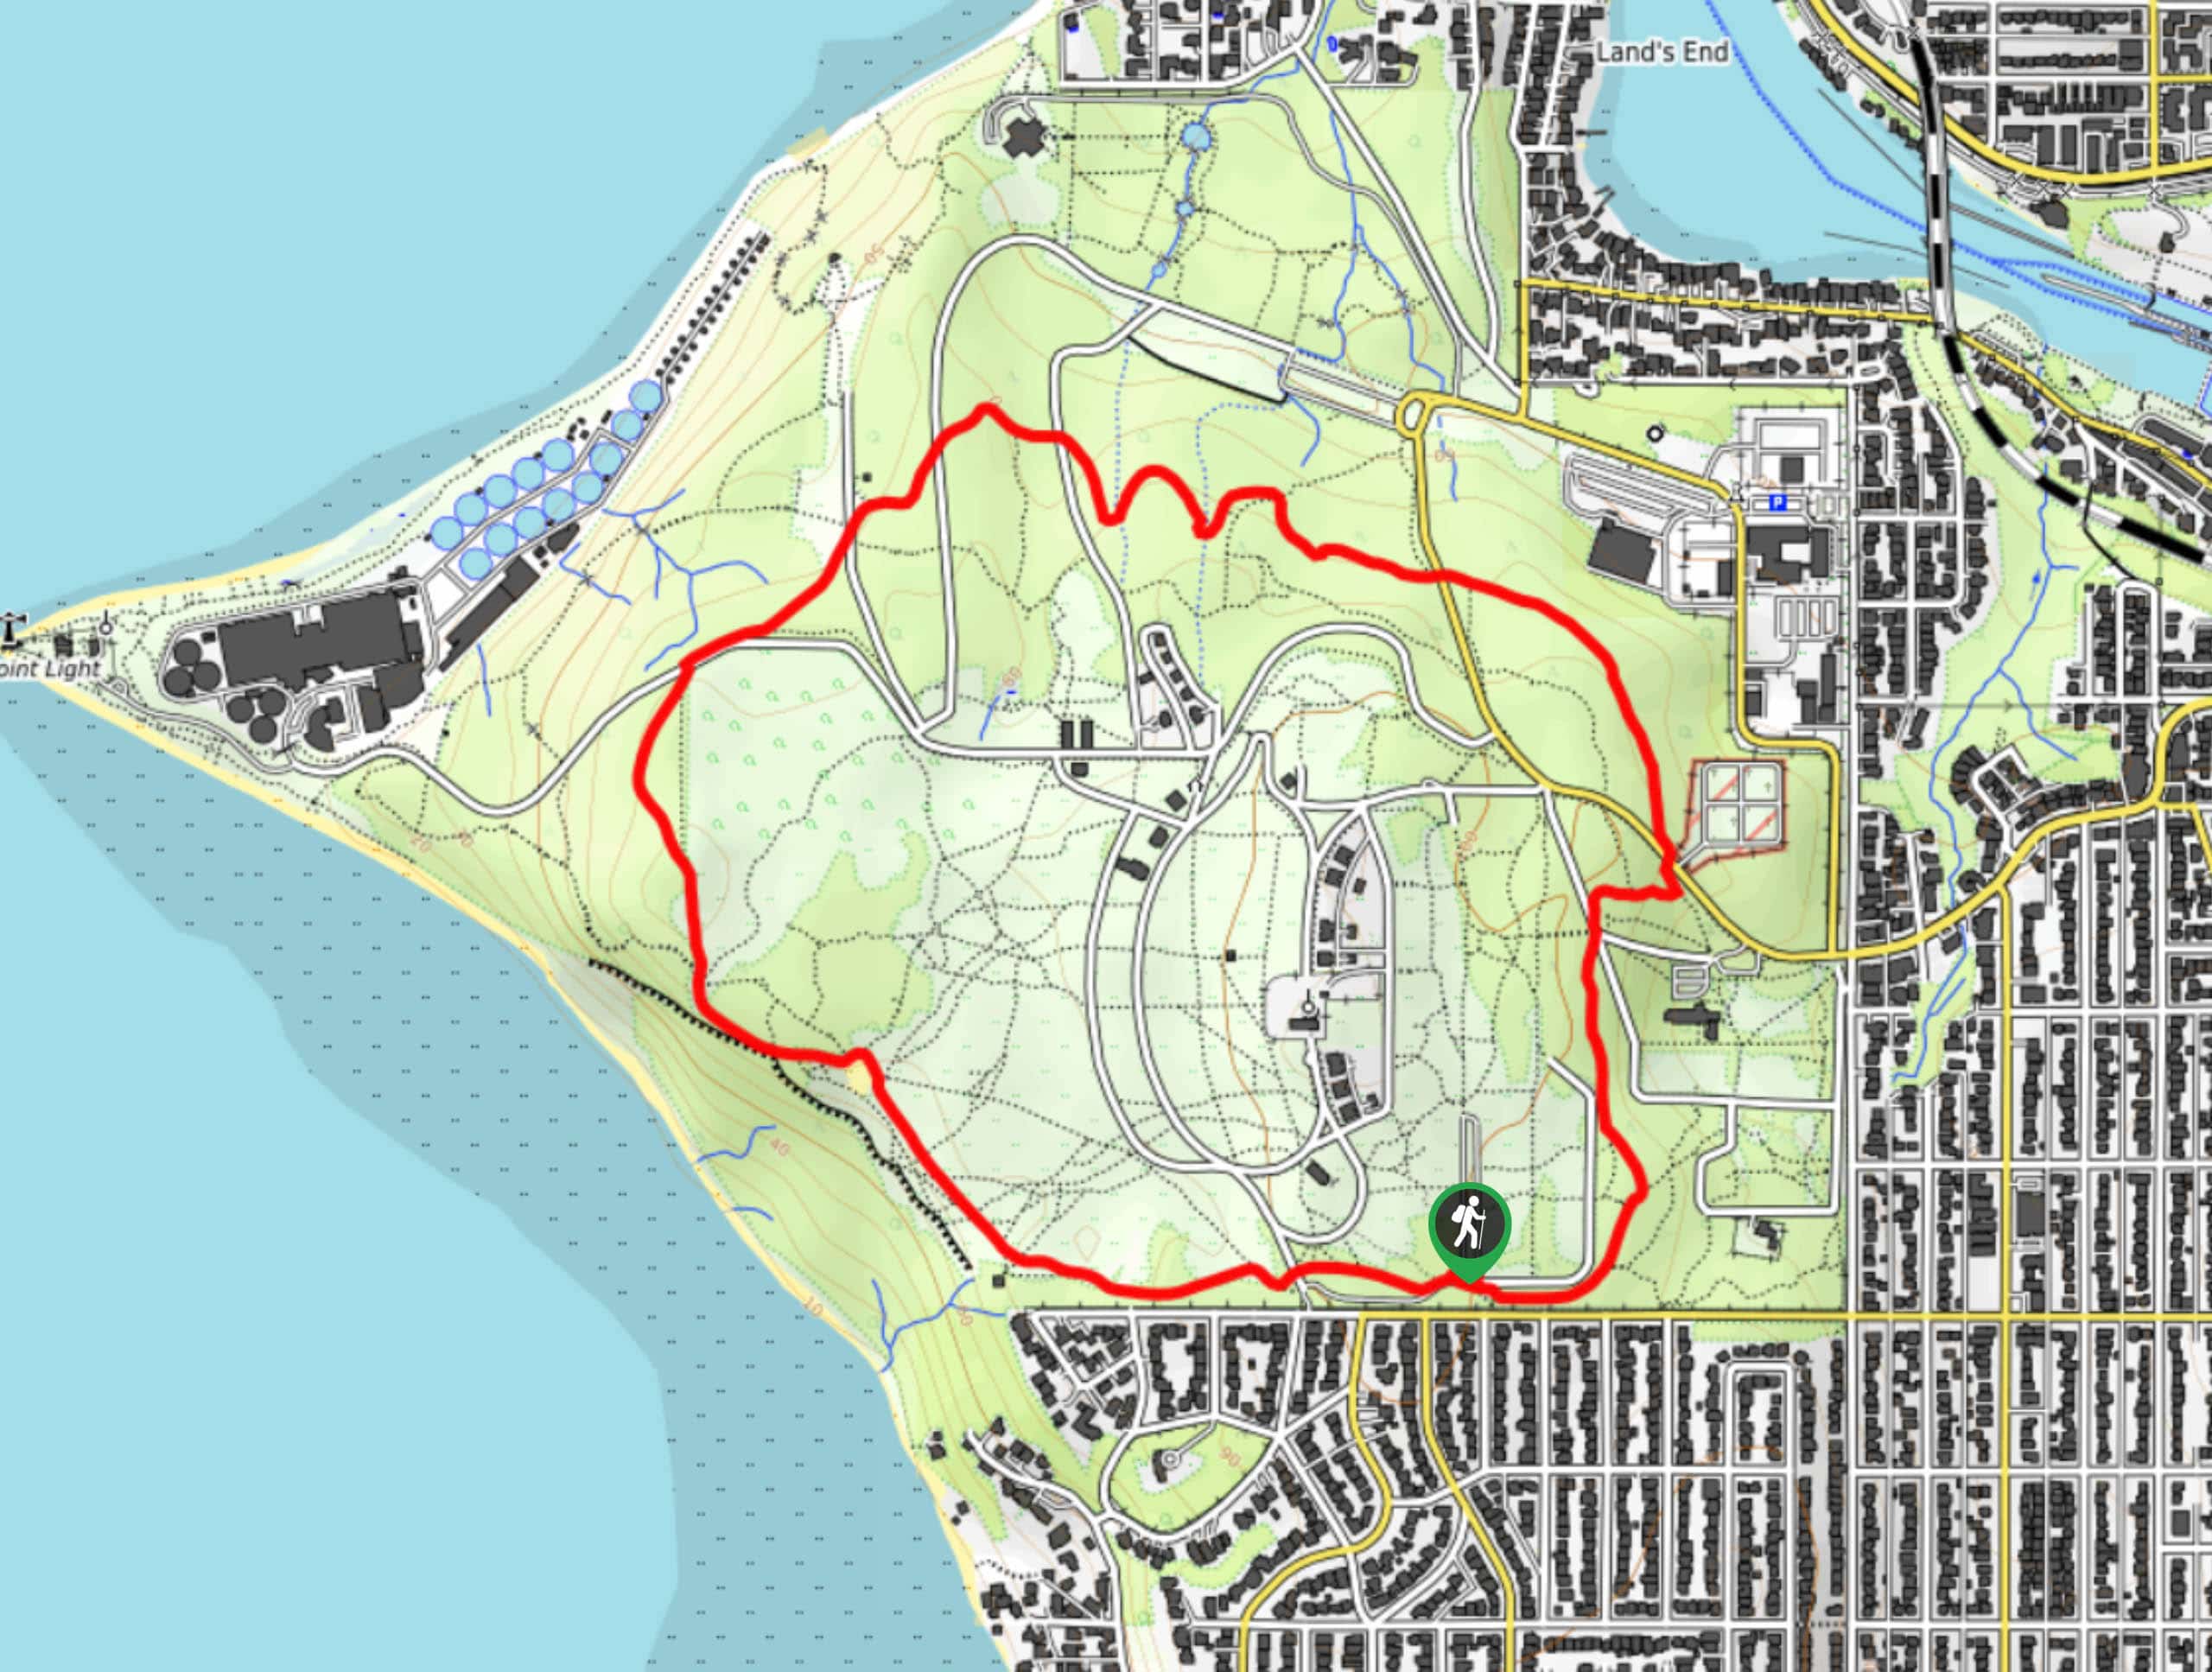 Discovery Park Loop via Emerson Entrance Map